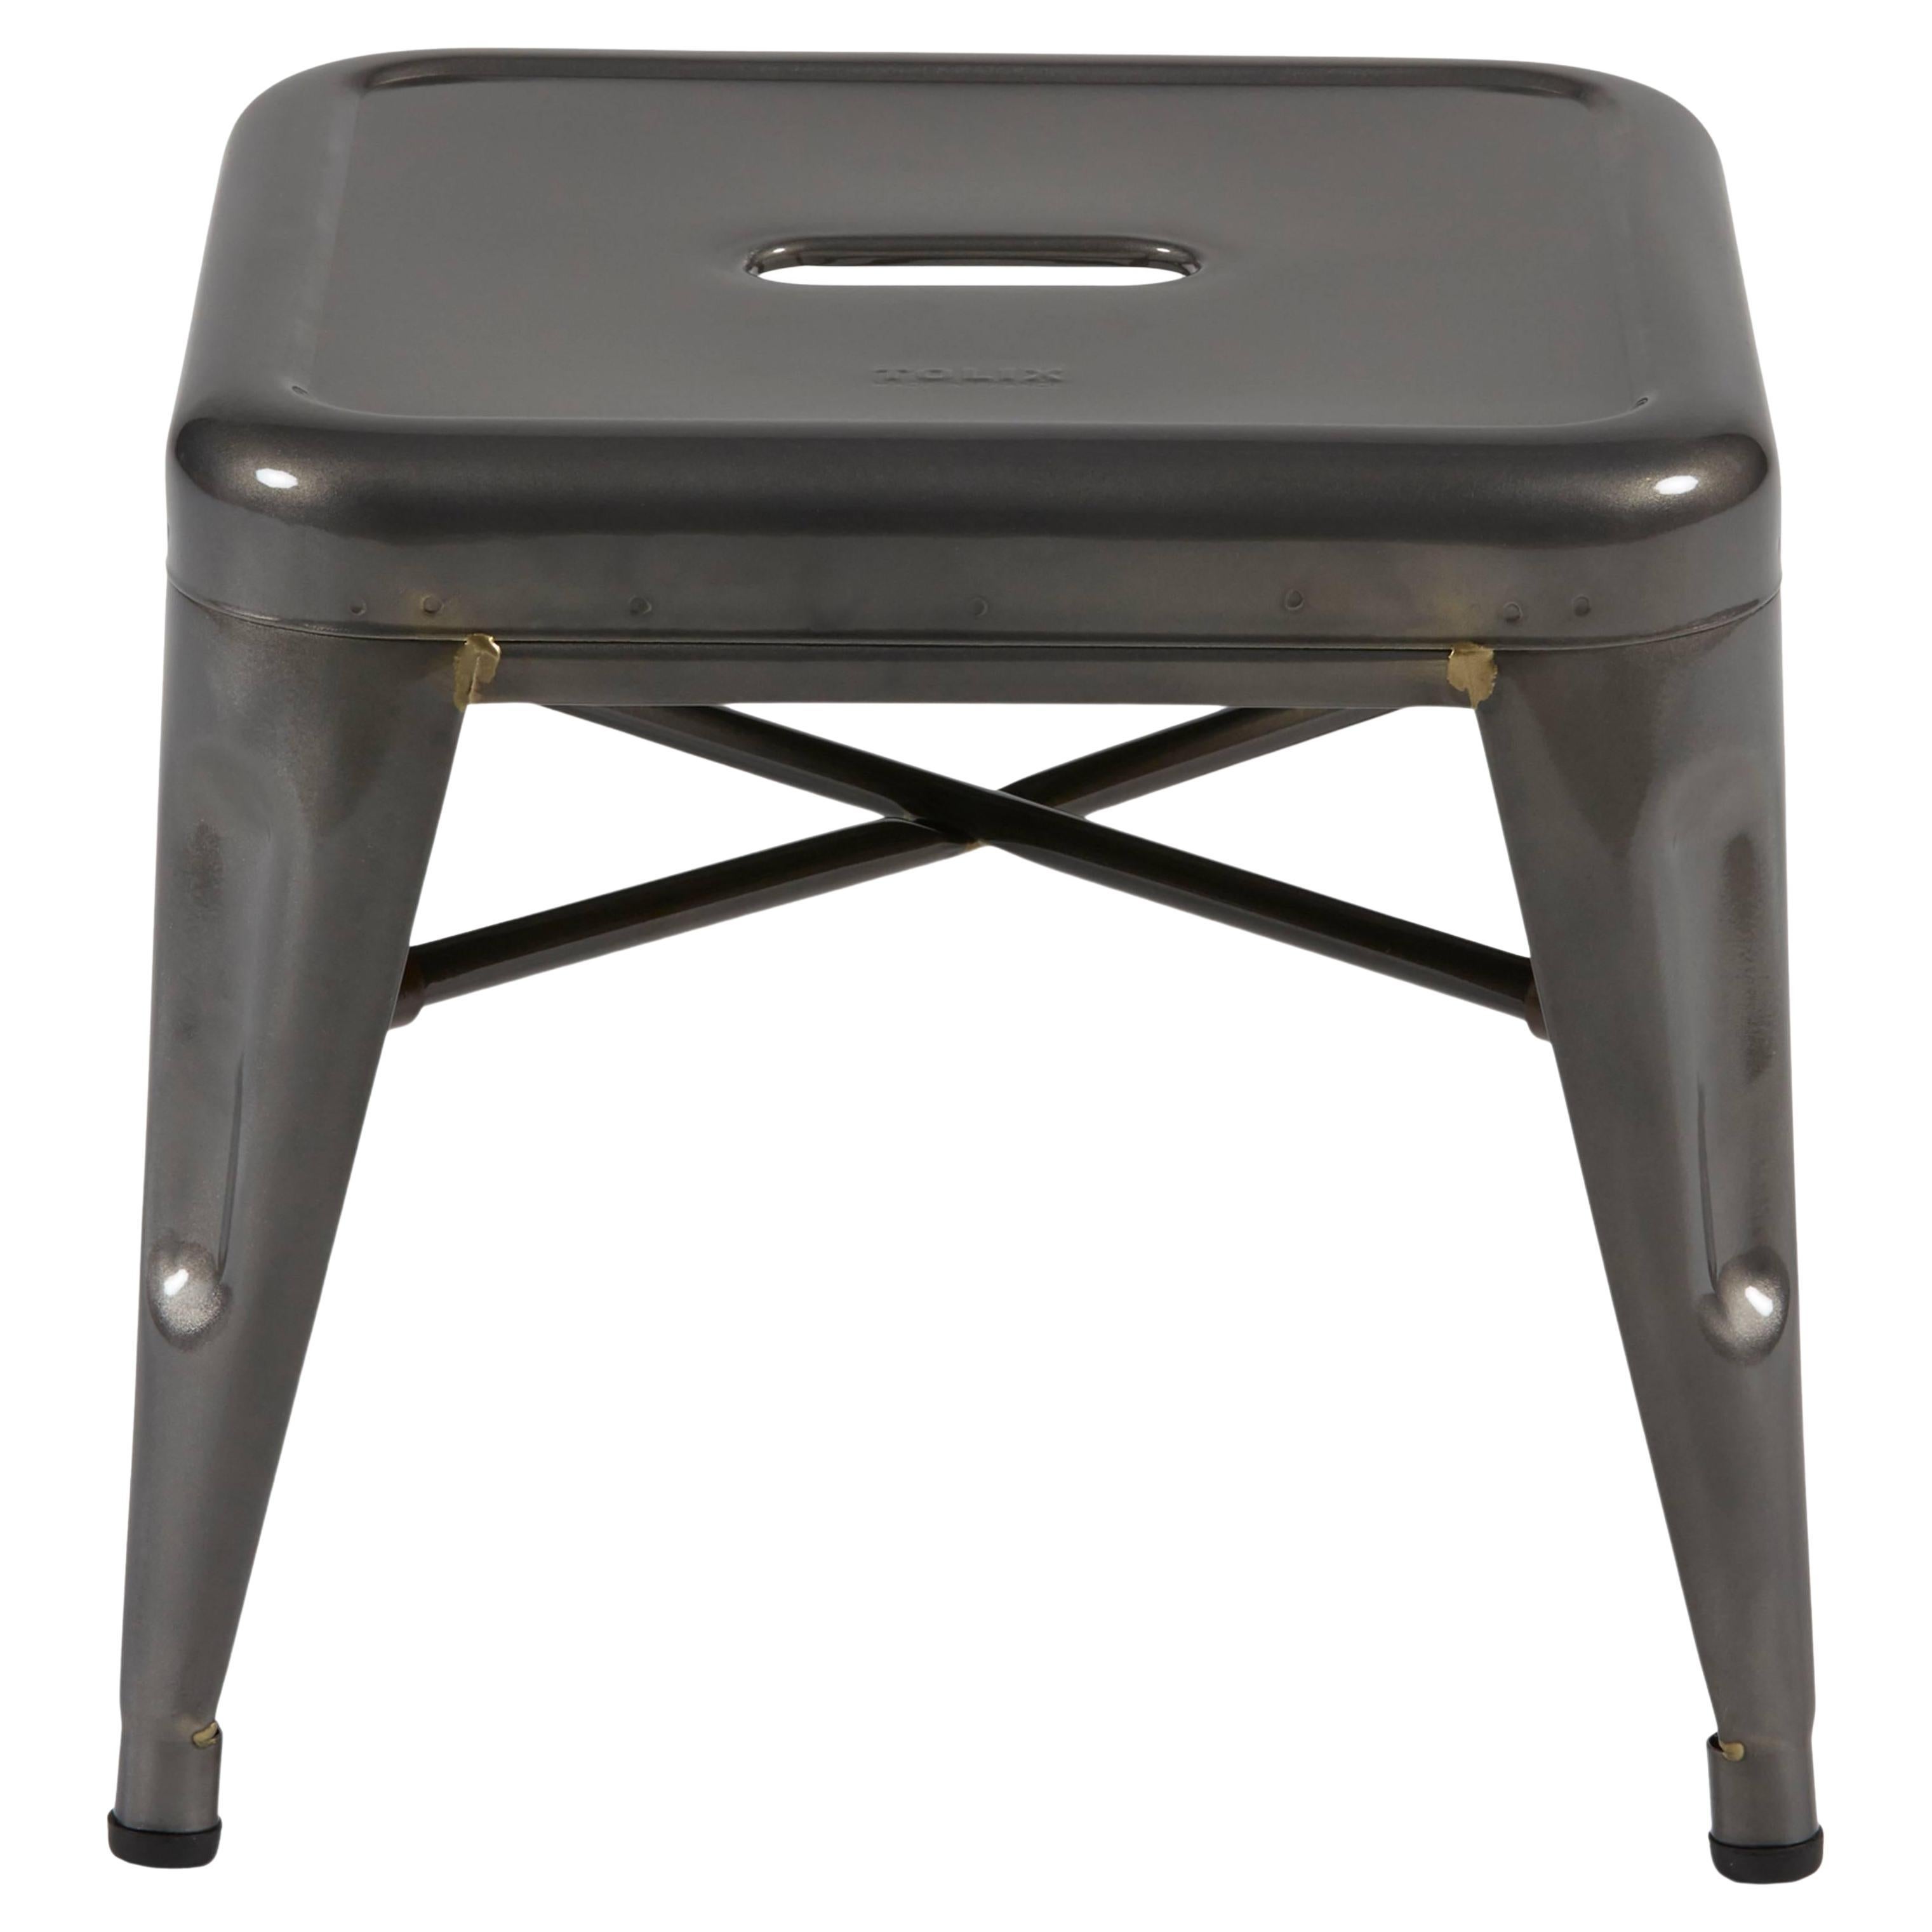 H Stool 30 in Essentiel Vernis by Chantal Andriot and Tolix